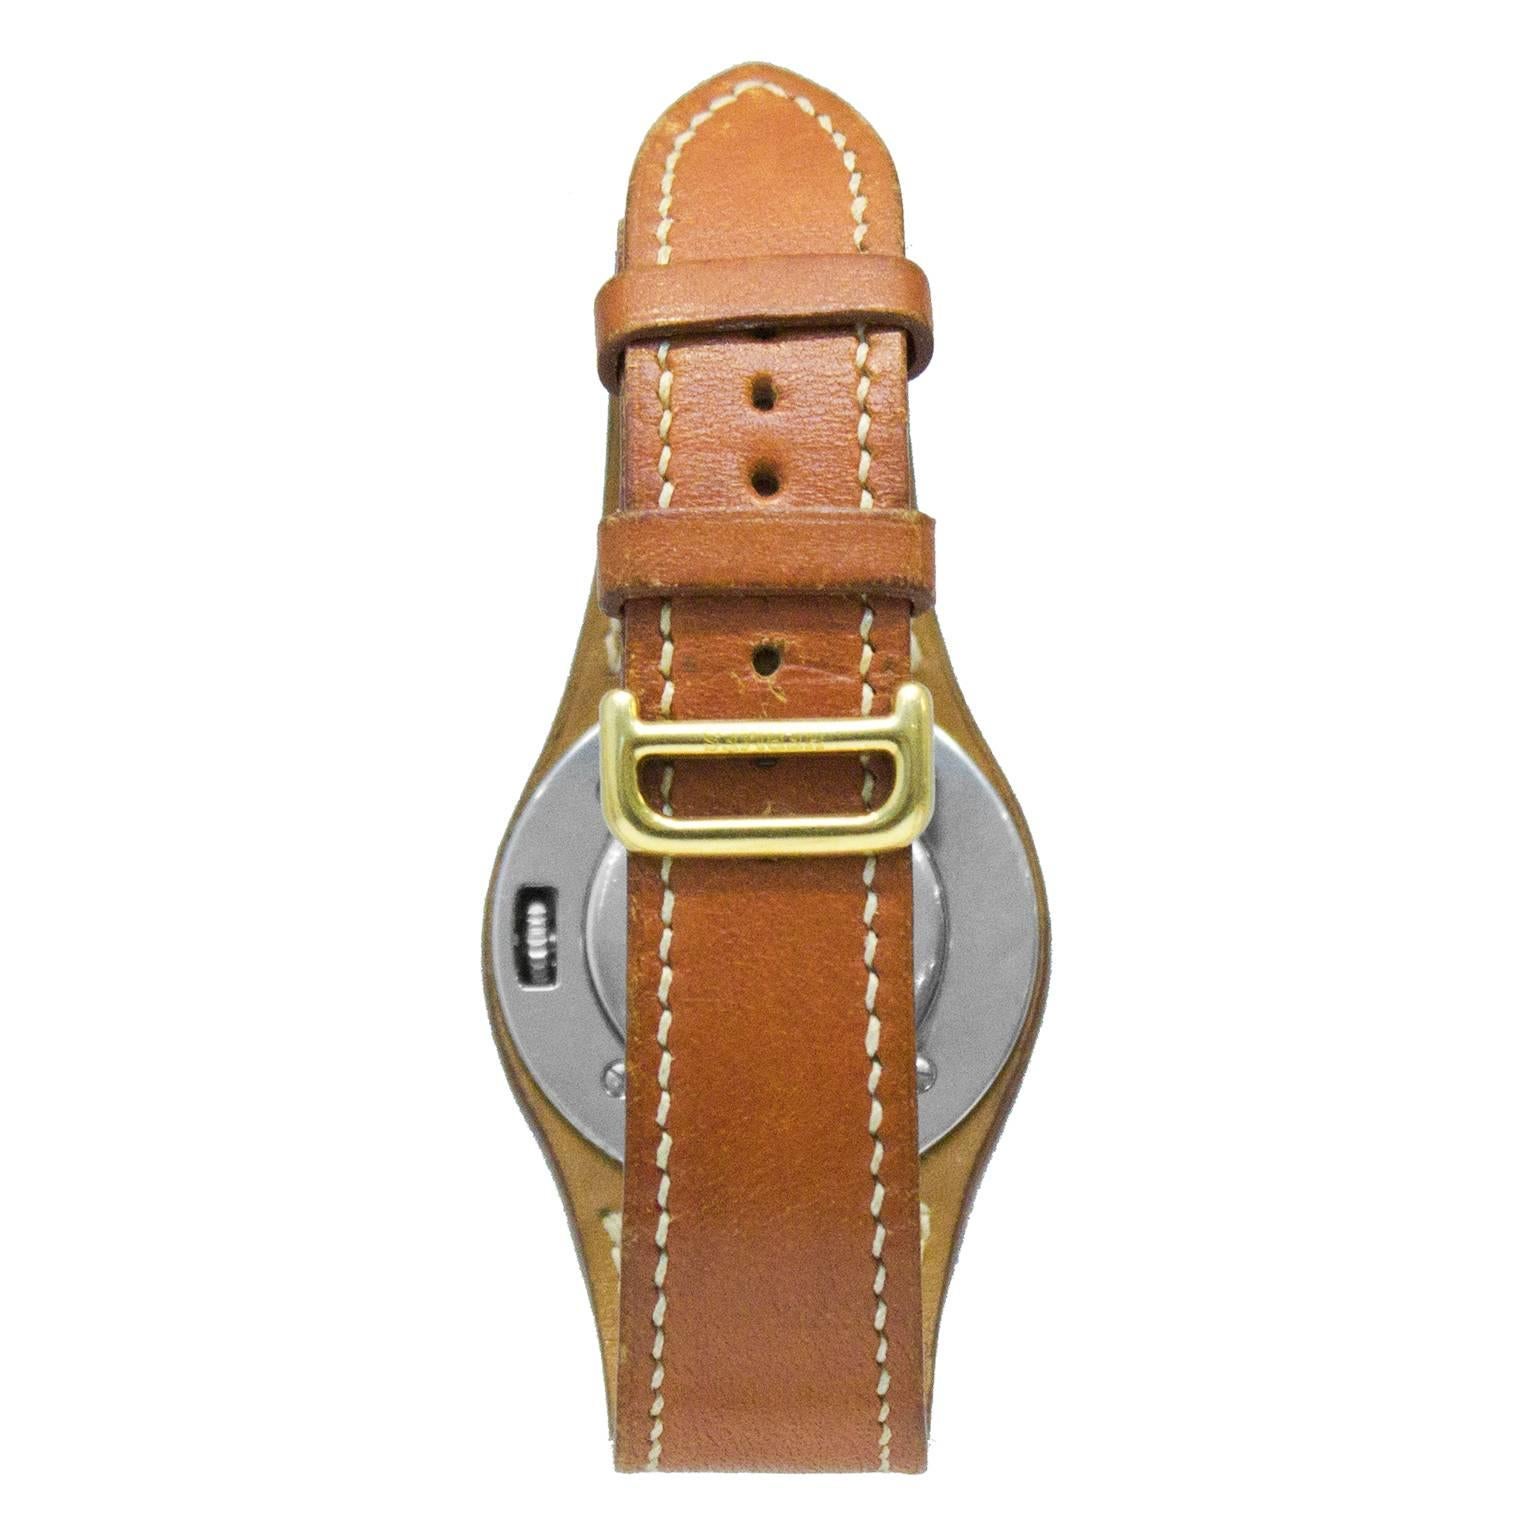 Hermes 1990's tan leather Harnais watch with beige stitching and gold hardware. The Swiss made watch features a white face with cream index hour markers and gold arms. There's a small date window at the 6’oclock position, and a concealed push/pull